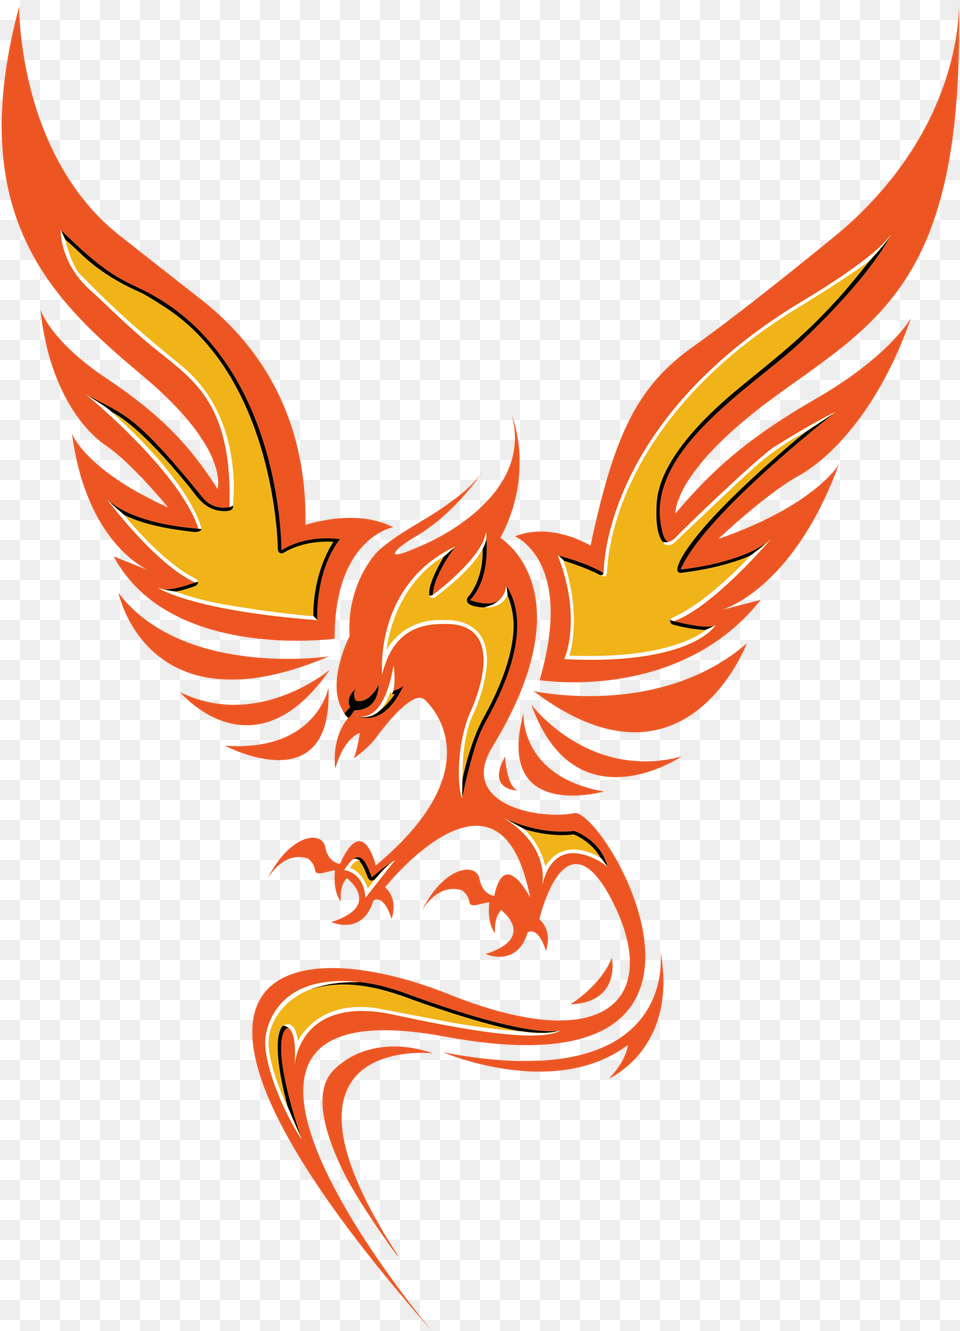 Ghost Recon Breakpoint Live Event U2013 Out Of The Ashes Fire Phoenix Logo Transparent, Flame, Person Png